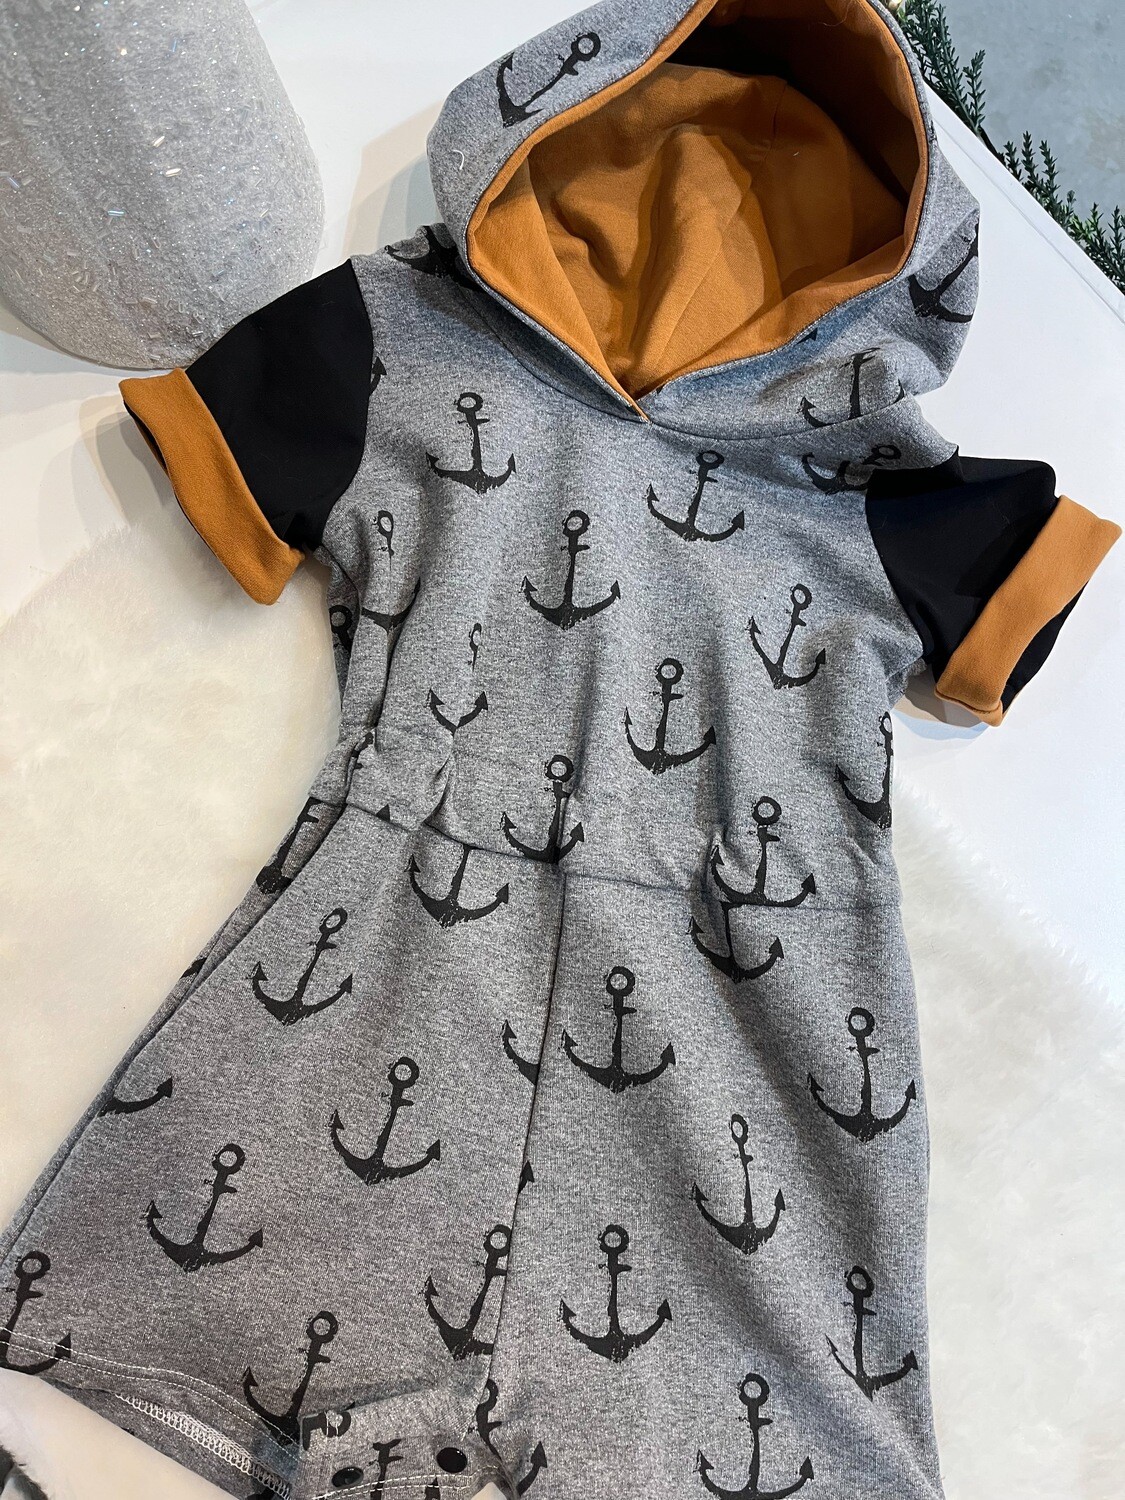 Dark Grey and Black Anchors with Camel Accents - Joelle jumper